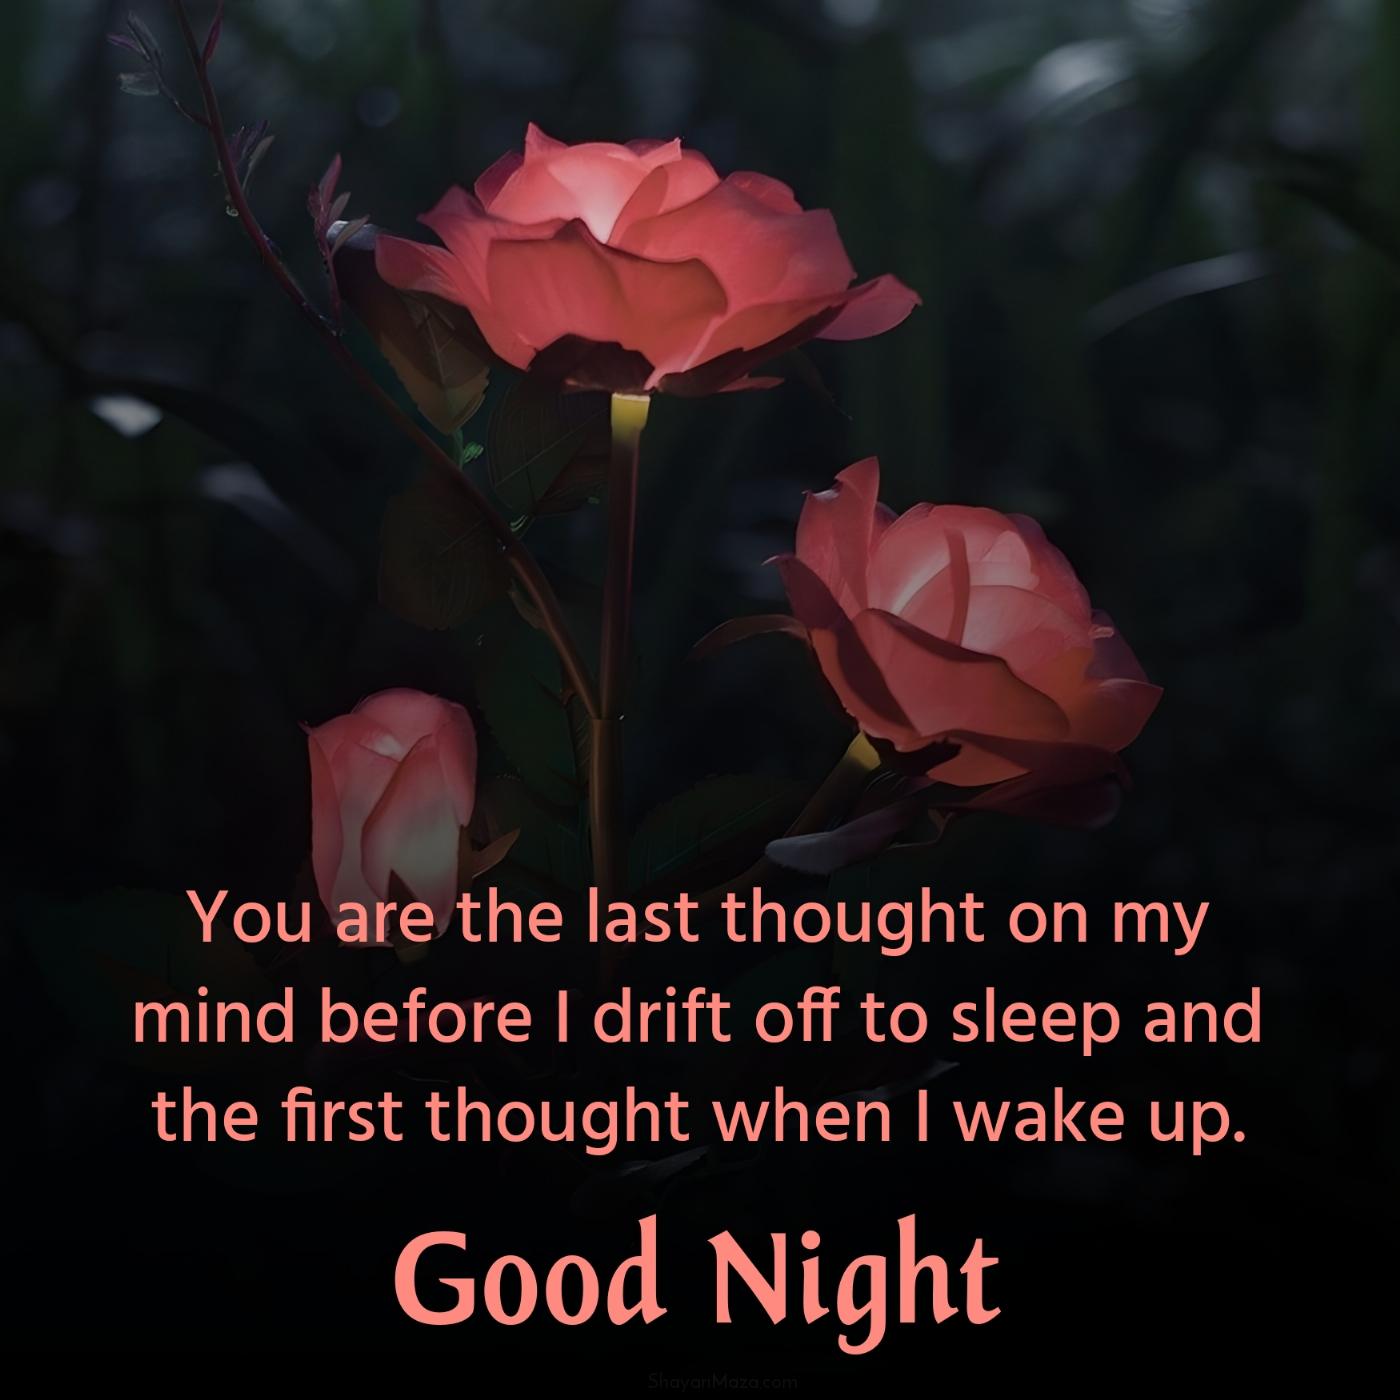 You are the last thought on my mind before I drift off to sleep